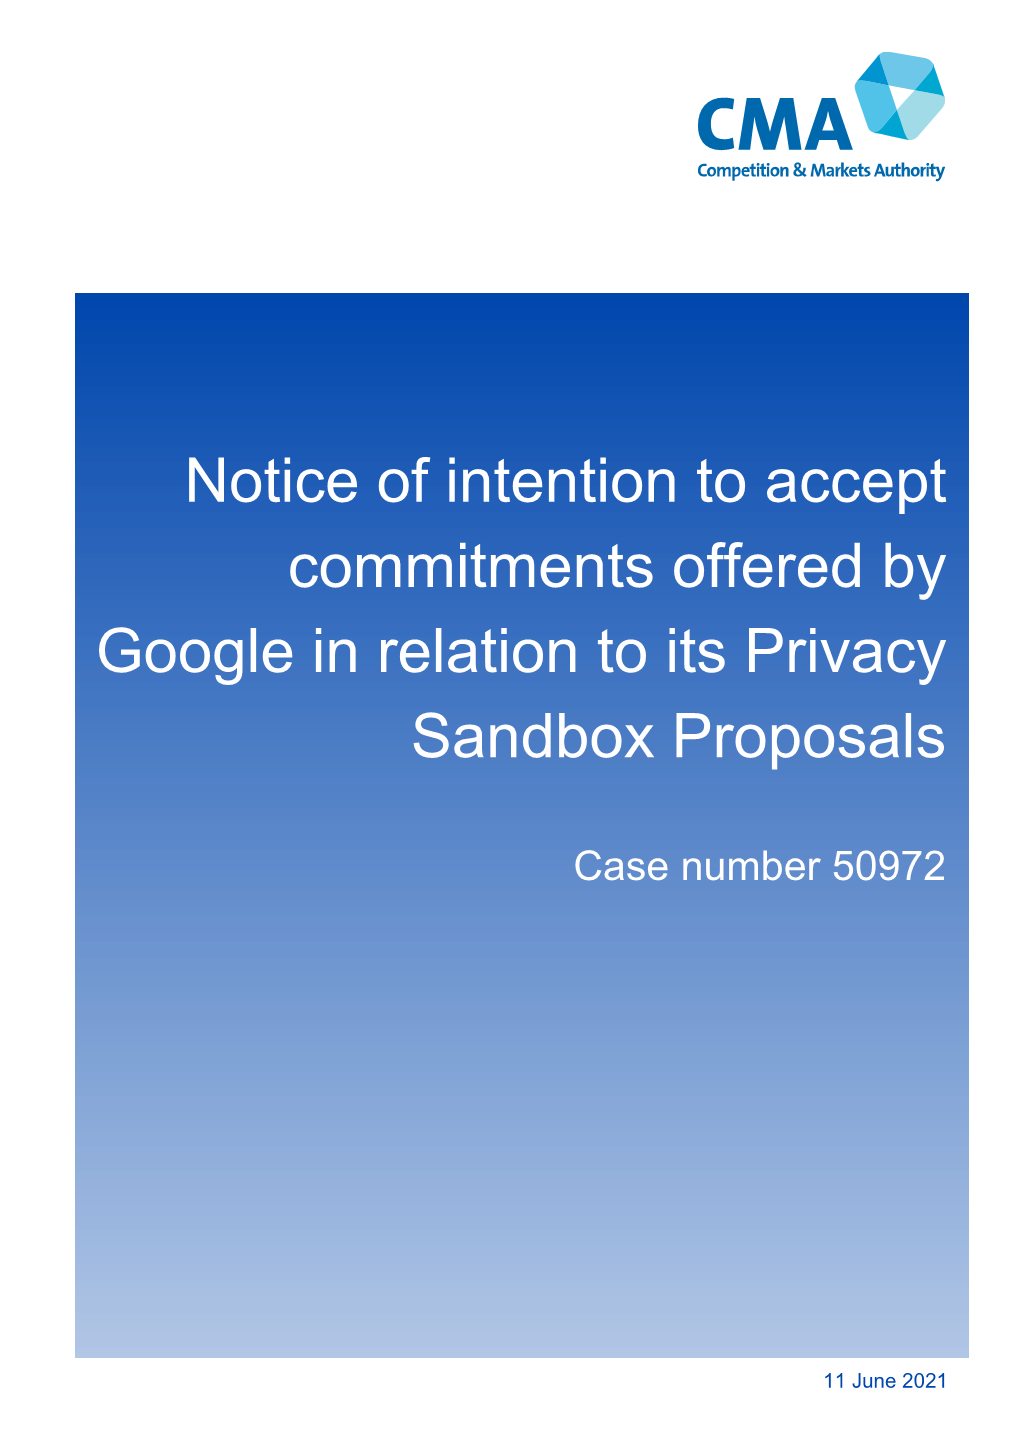 Notice of Intention to Accept Binding Commitments Offered by Google